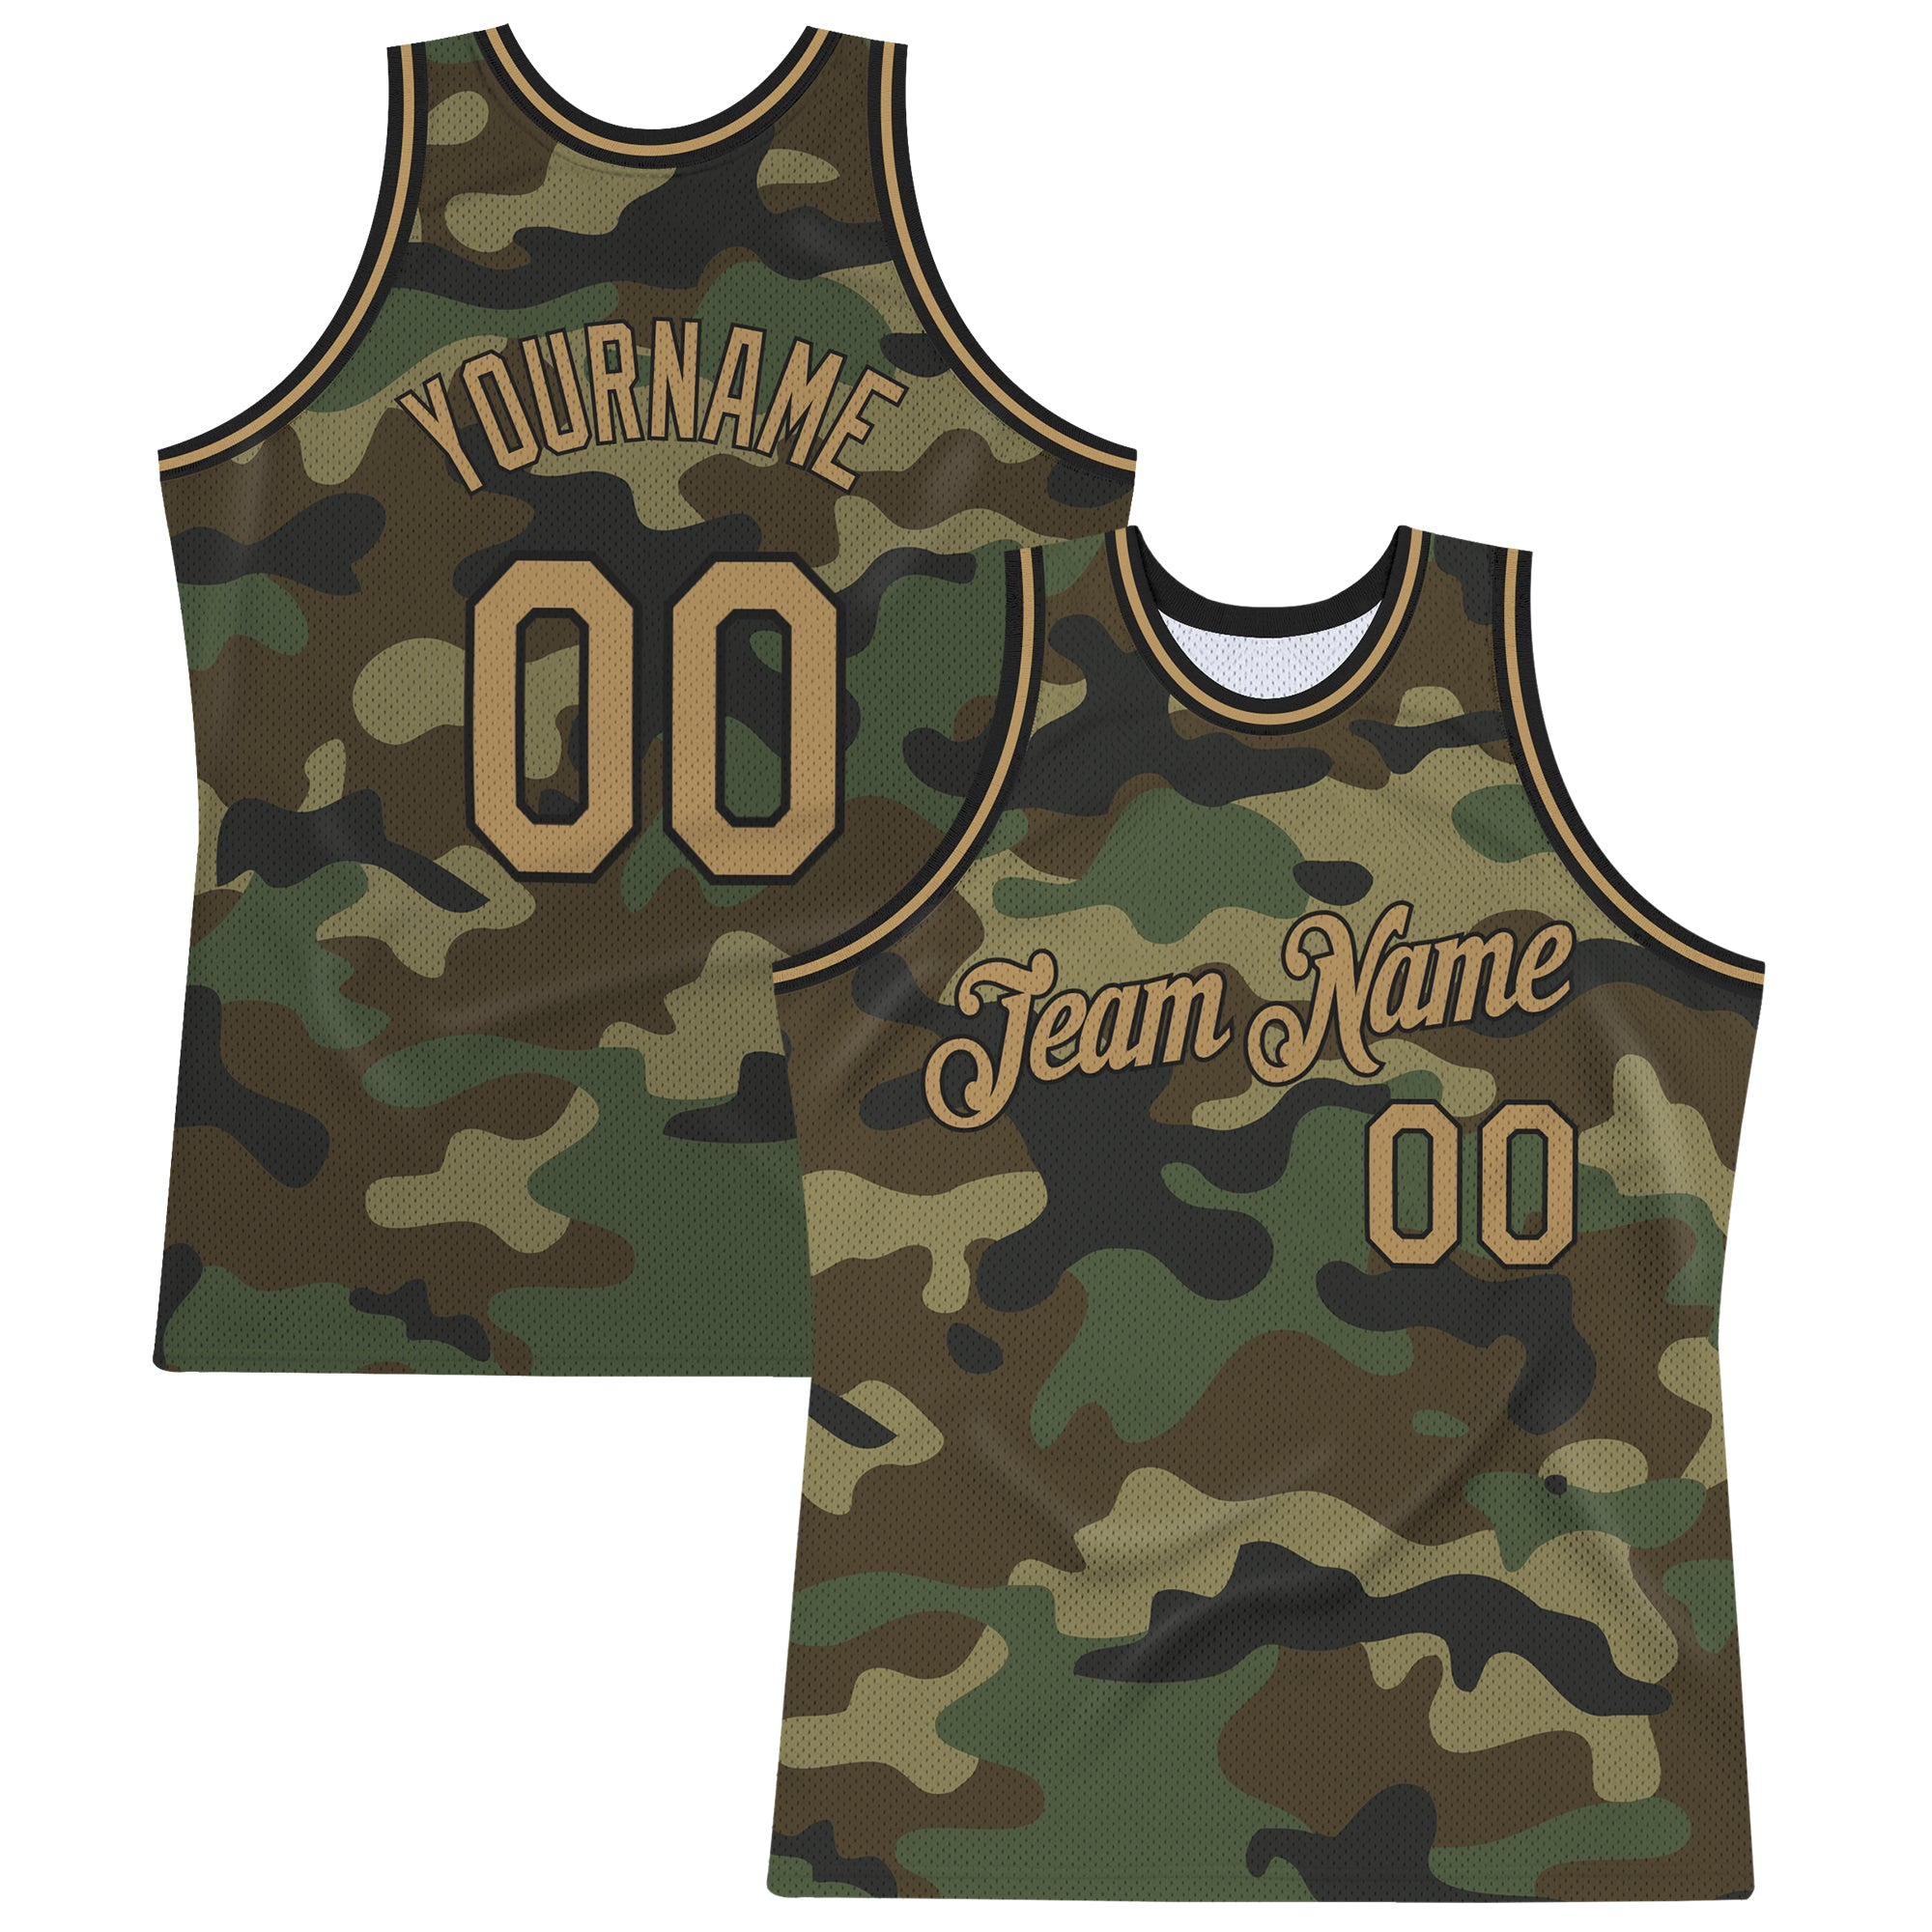 FIITG Custom Basketball Jersey Camo Old Gold-Black Authentic Salute to Service